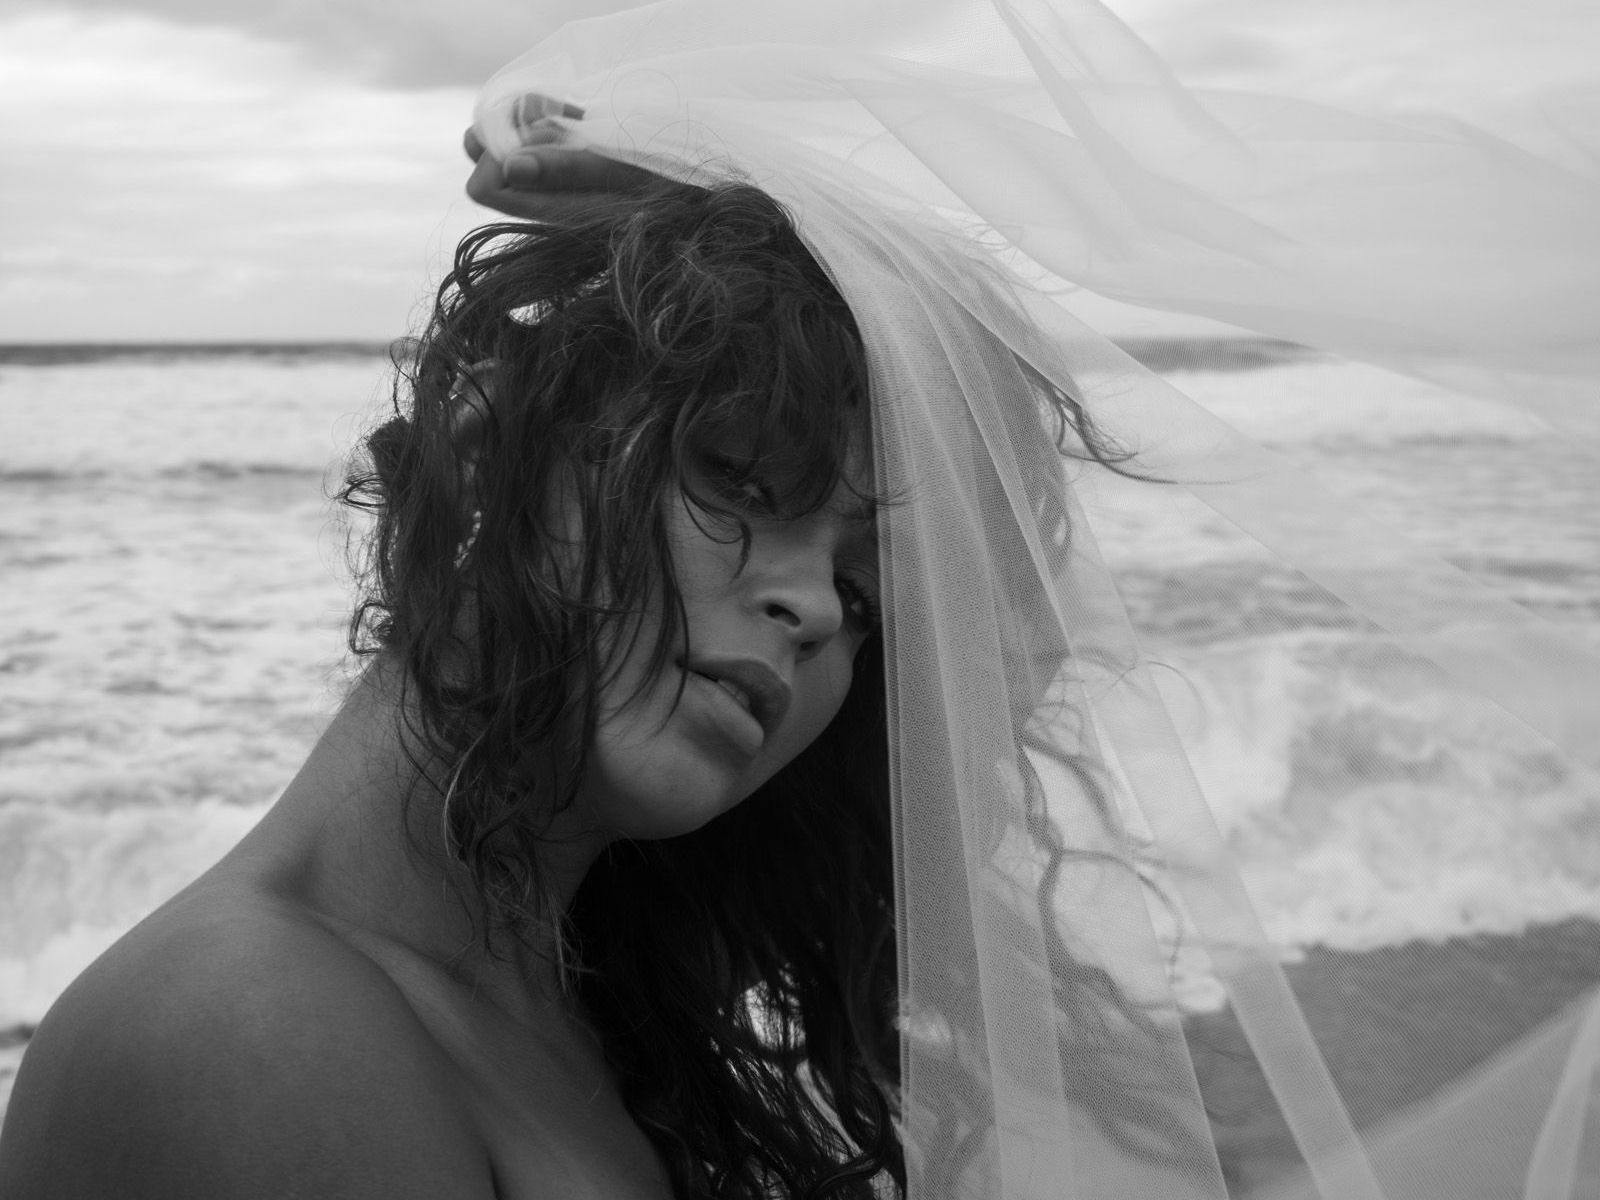 Claire O'Brien at a beach, holding a veil-like piece of material across their head.